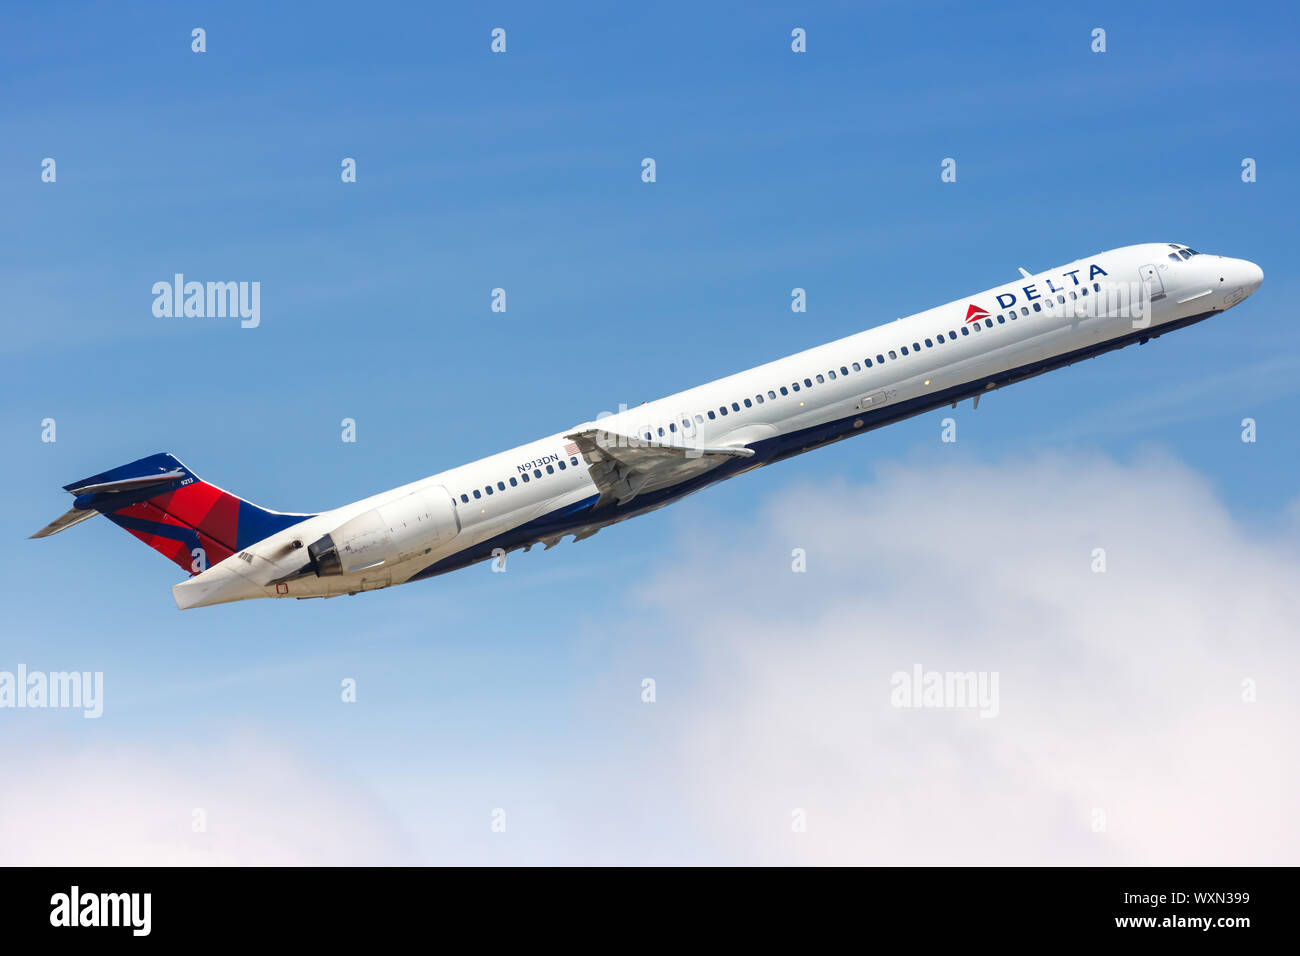 Fort Lauderdale, Florida – April 6, 2019: Delta Air Lines McDonnell Douglas MD-90 airplane at Fort Lauderdale airport (FLL) in Florida. Stock Photo